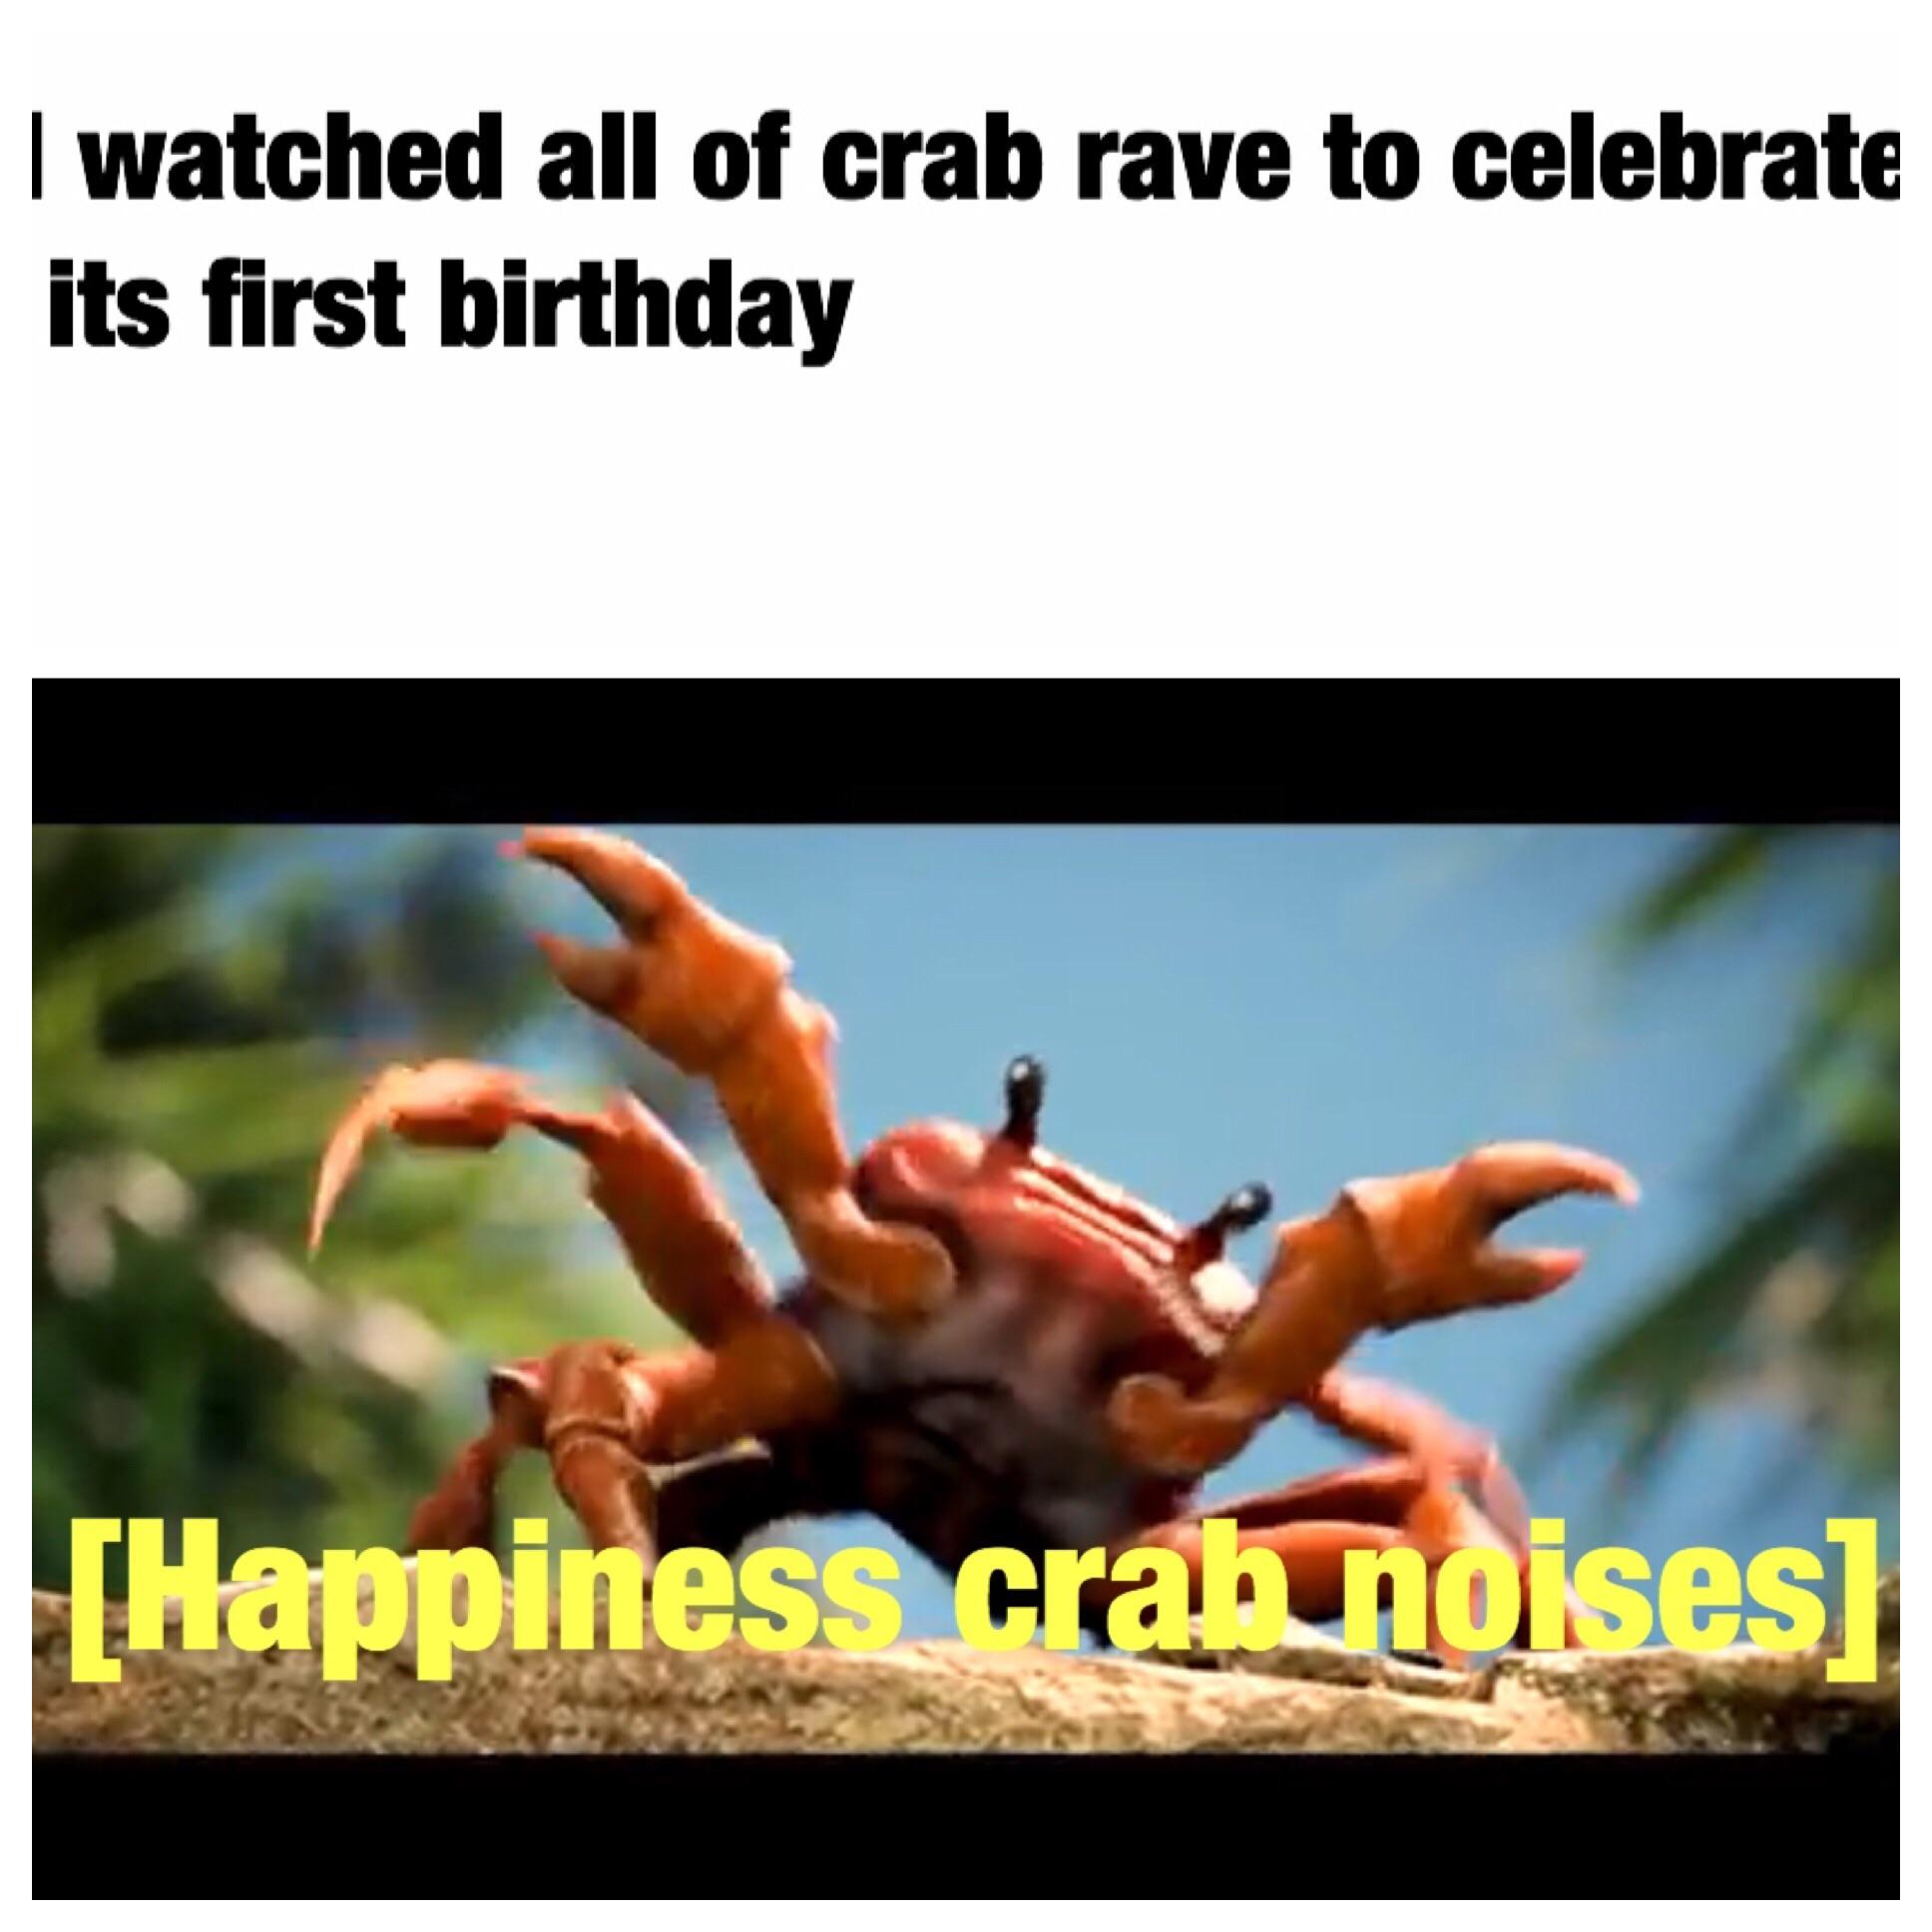 Noise crab rave release